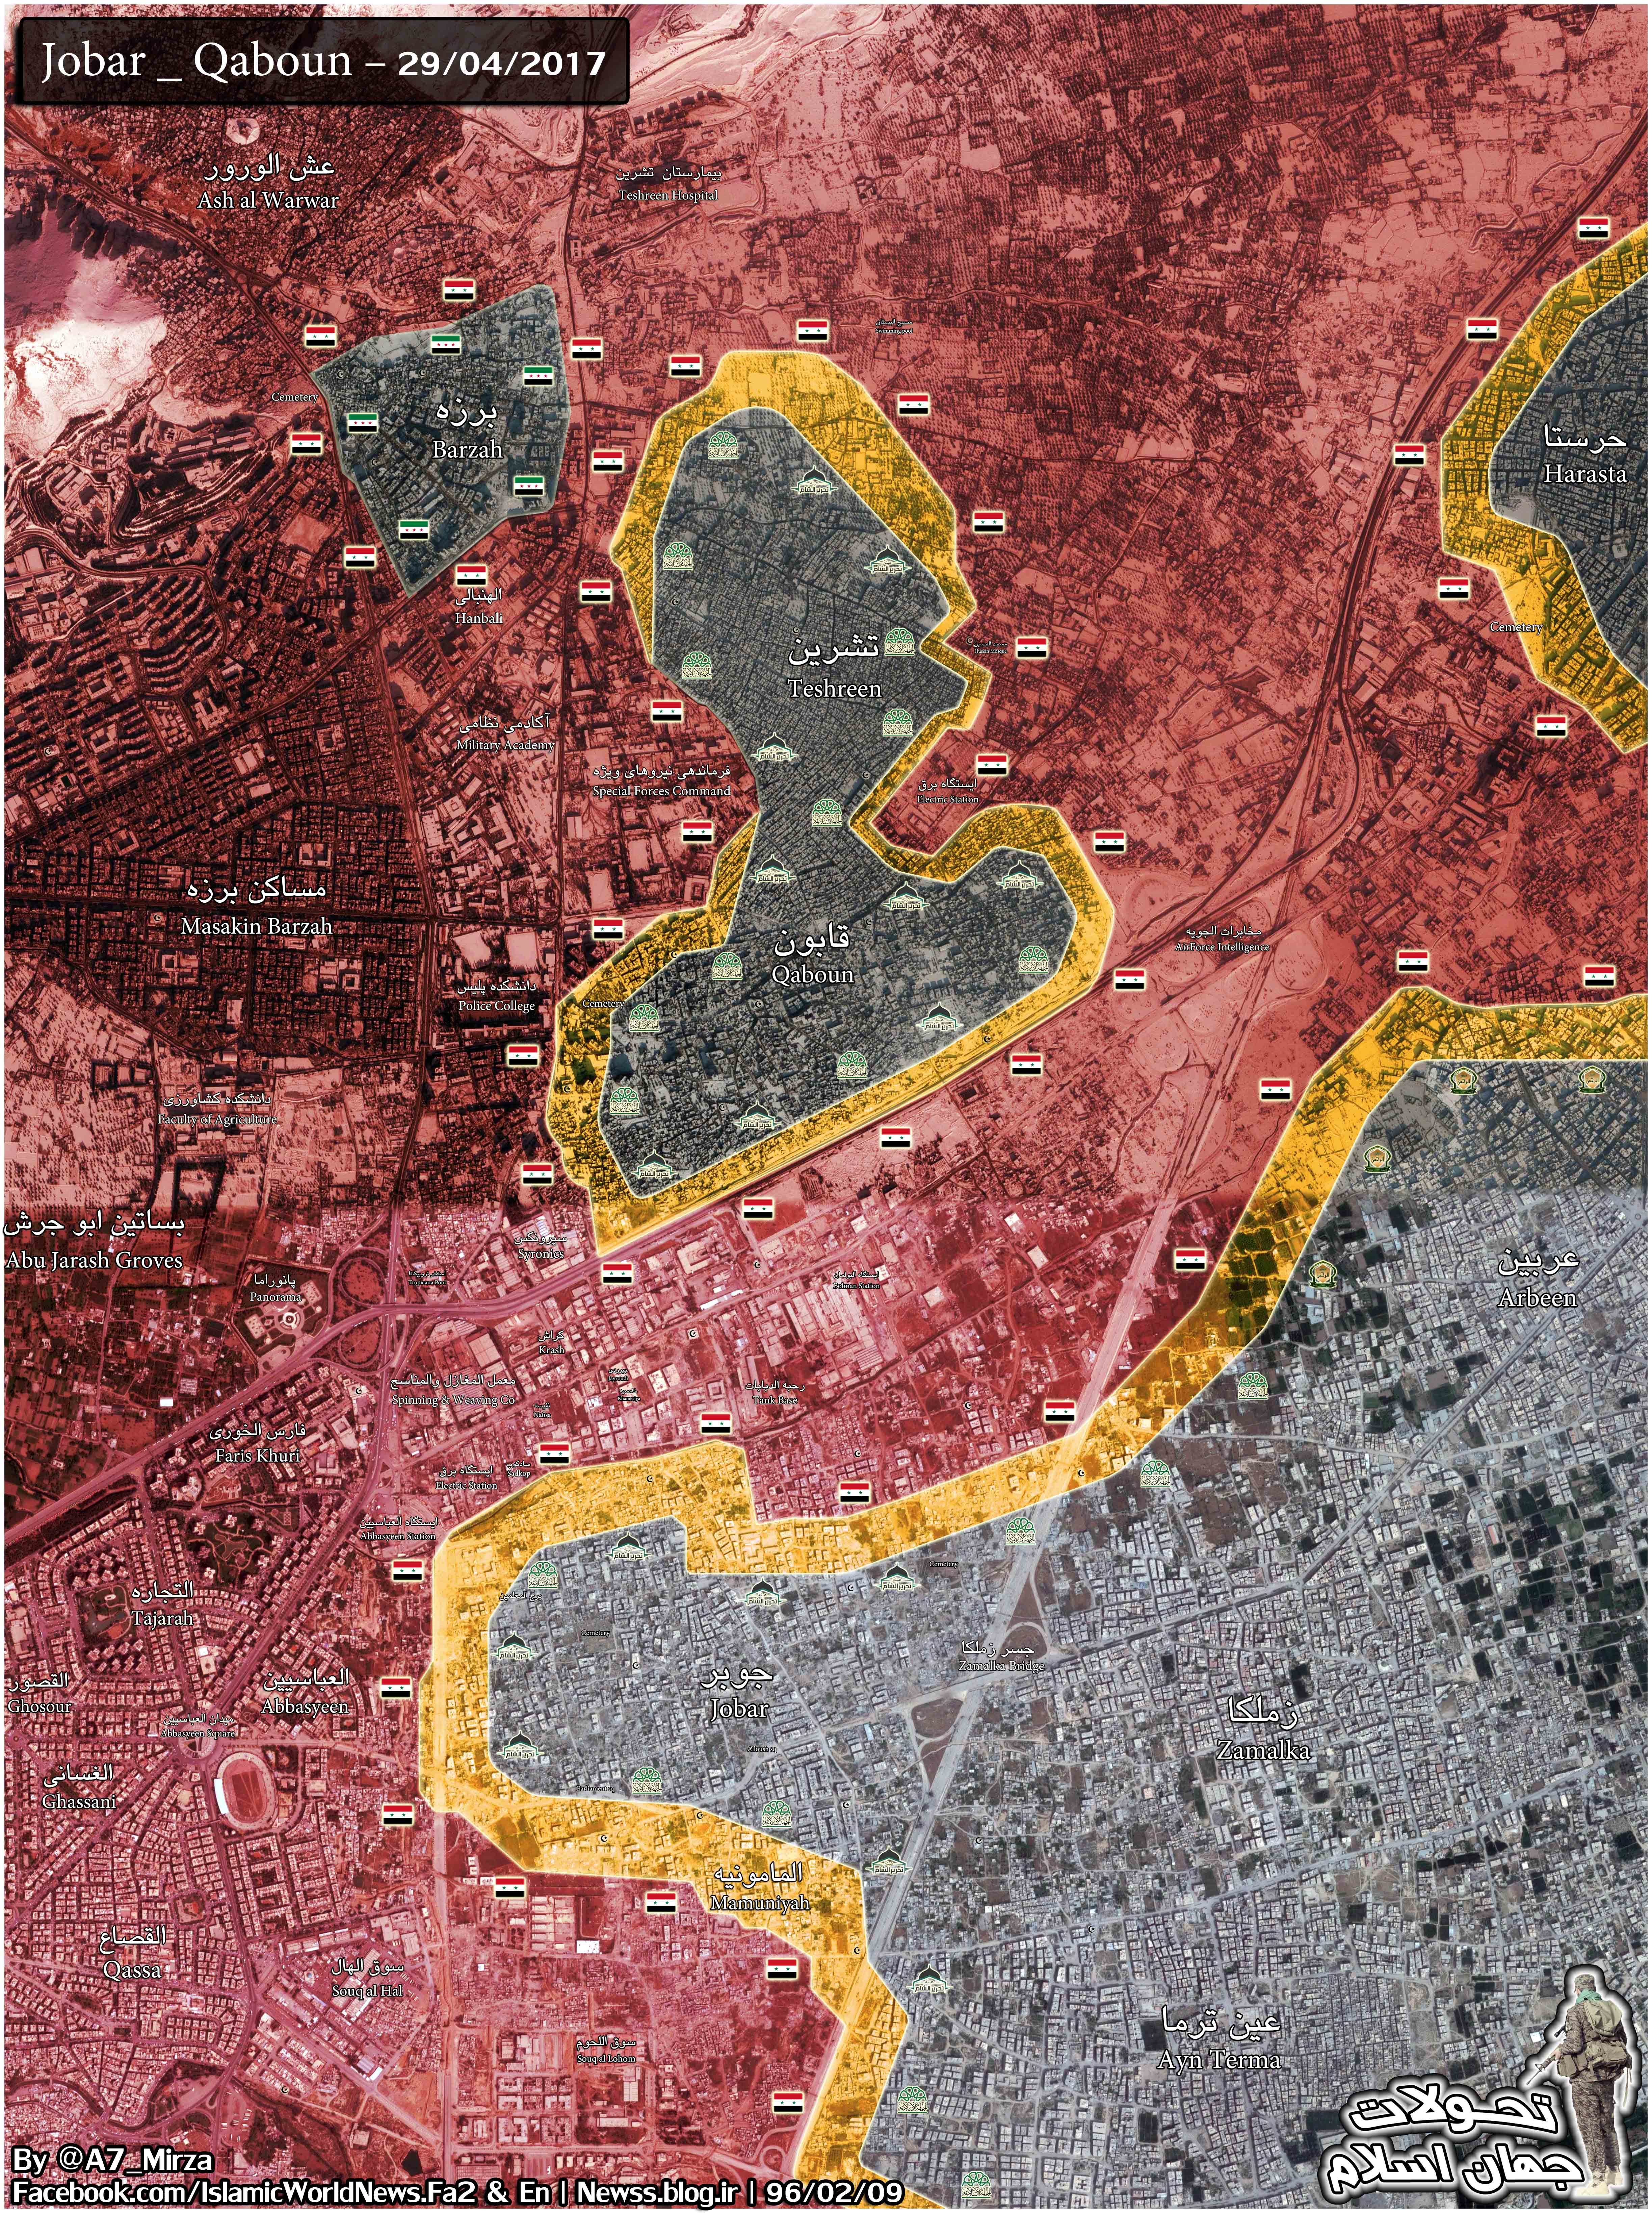 Syrian Army In Just 600m Away From Dividing Militant-held Qaboun Pocket Into Two Separate Parts